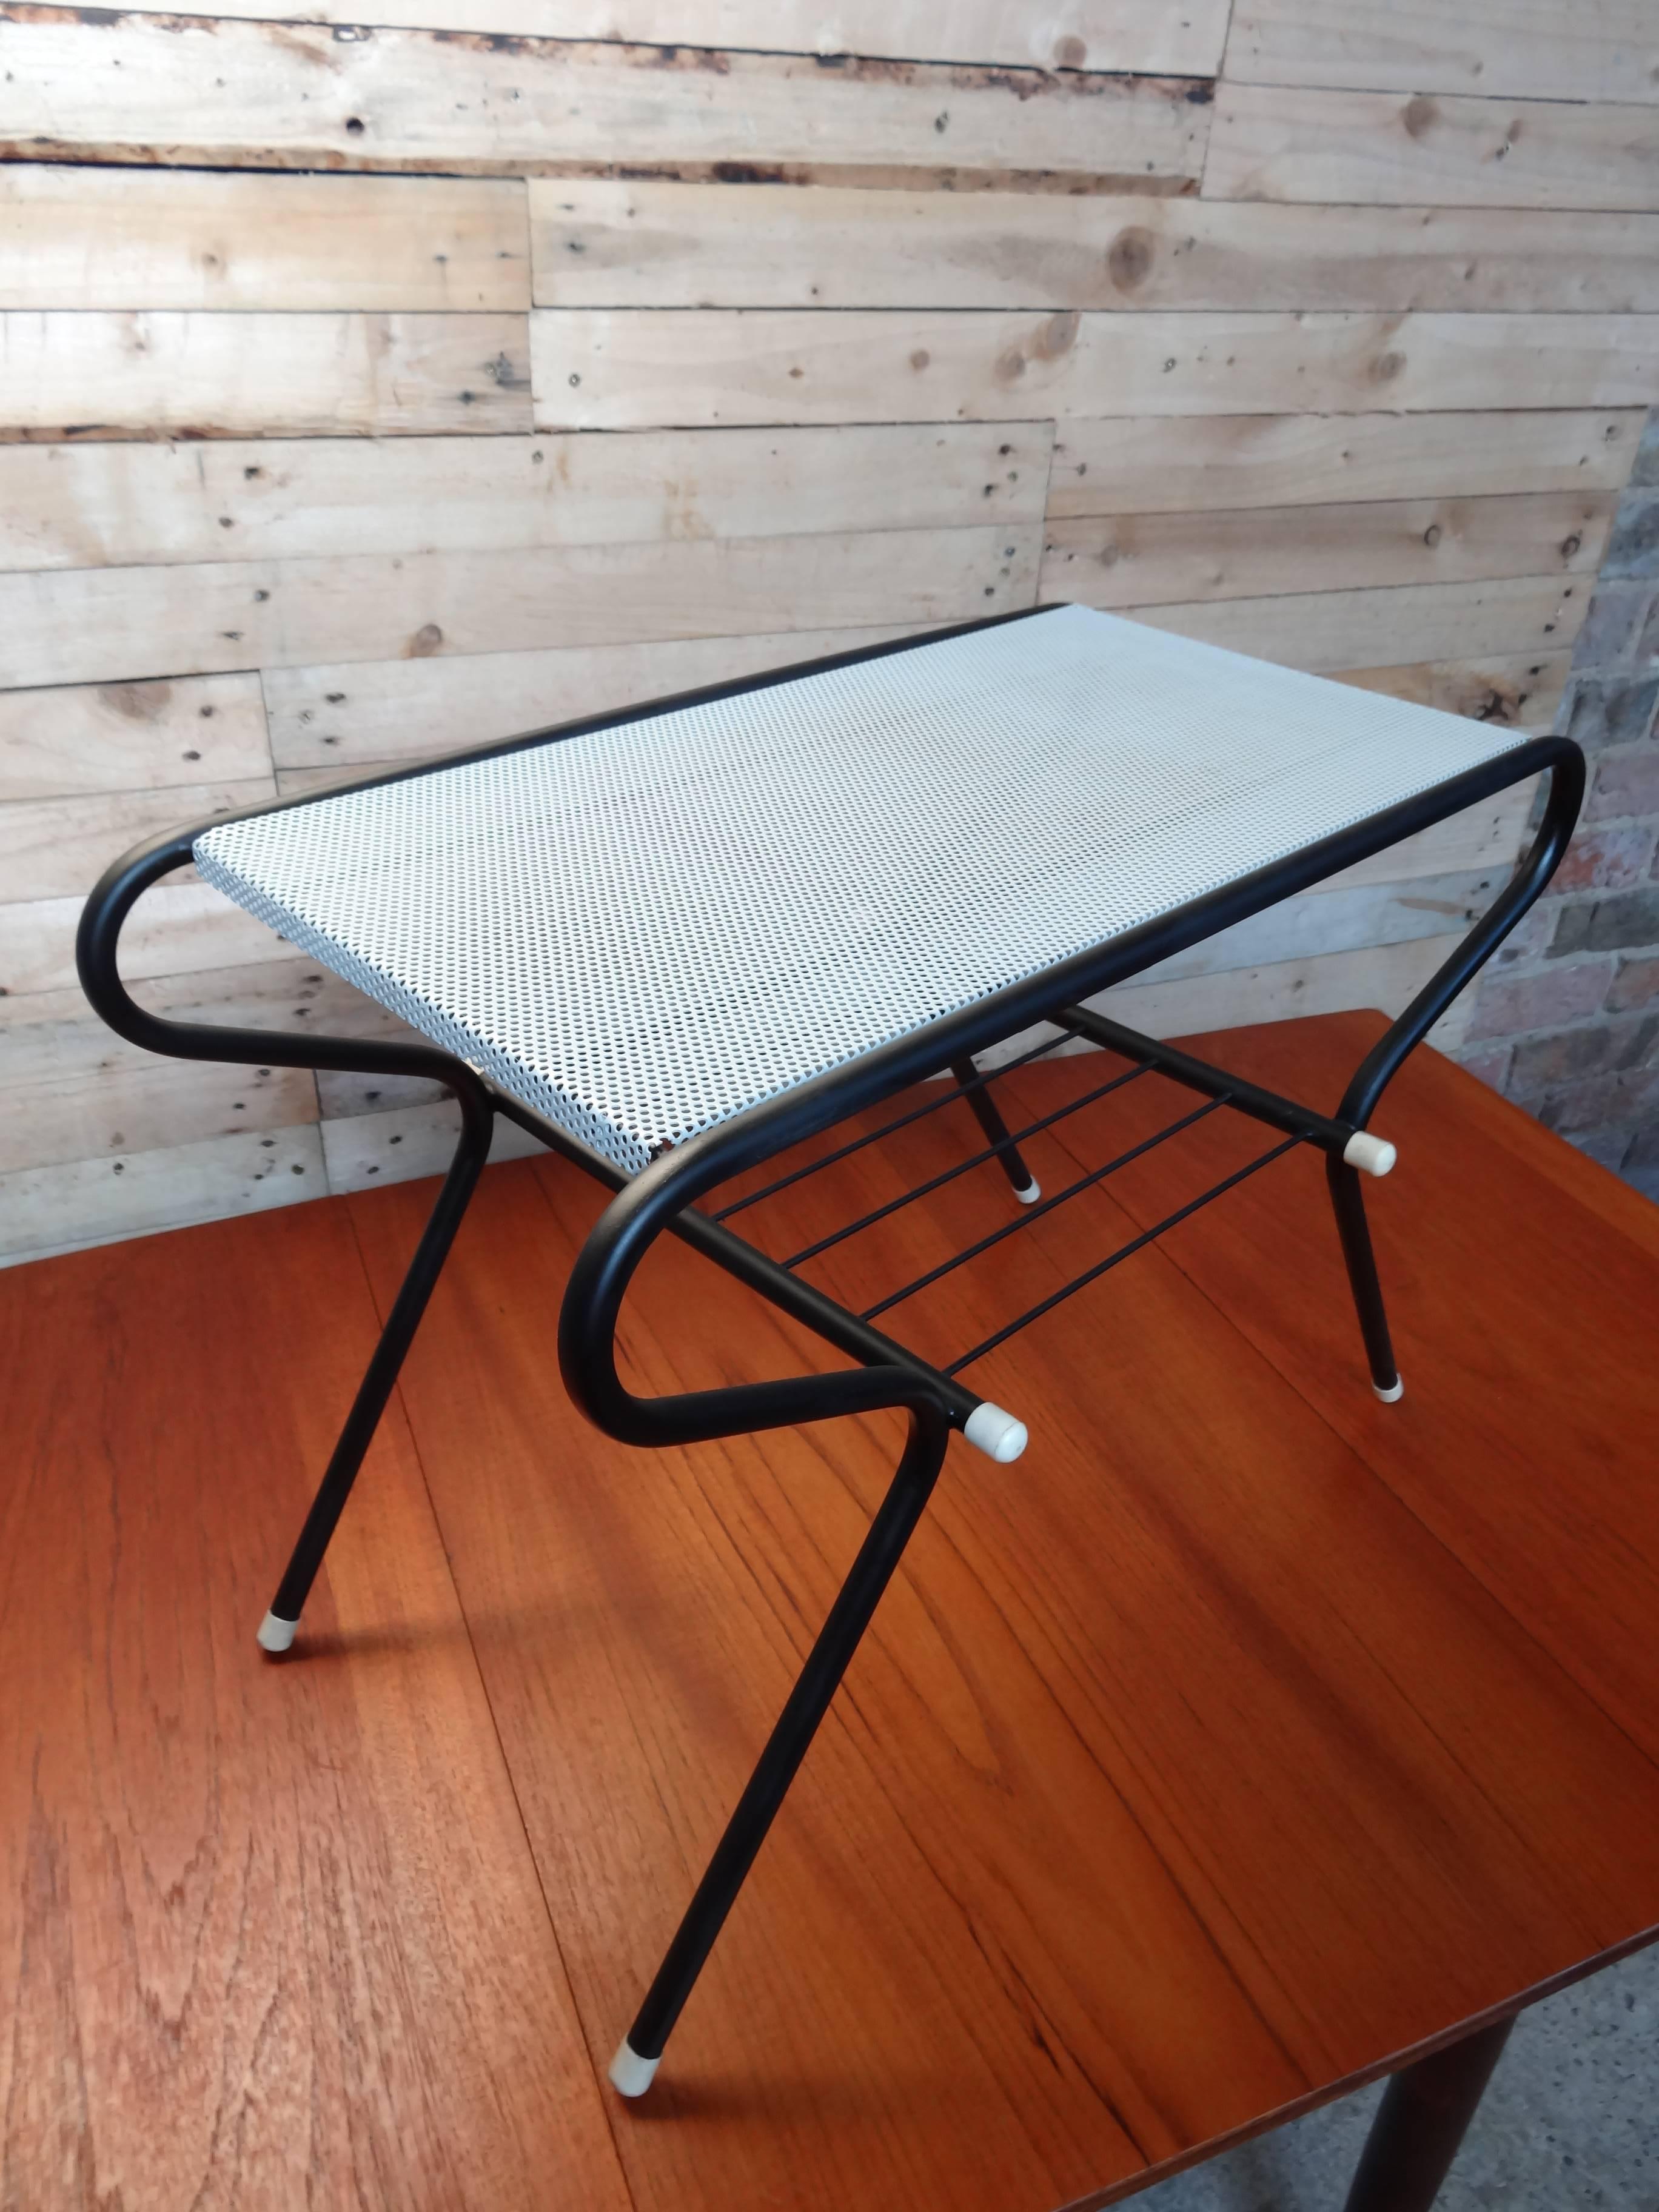 1960 retro vintage stunning Mathieu Mategot full black and white metal side table.
Lovely table, incredibly sought after and rare item a wonderful clean example of a modern antique Classic, 

Dimensions (approx.): Height 47 cm, depth 39 cm, width